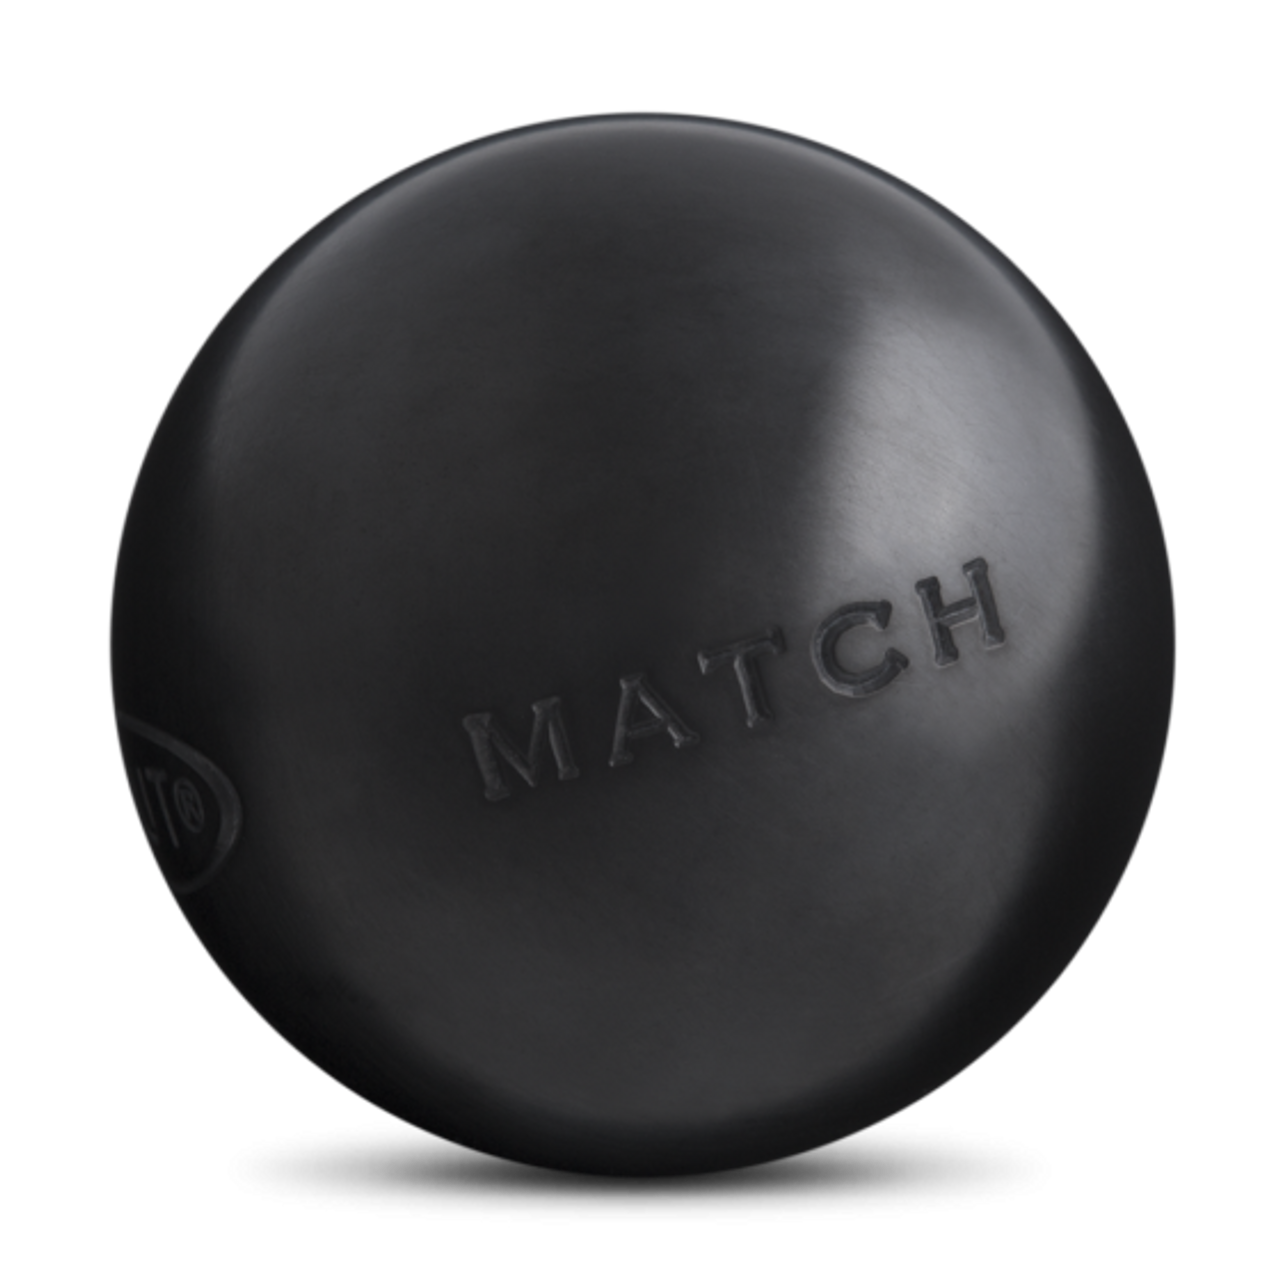 Obut Match IT Smooth - In Stock